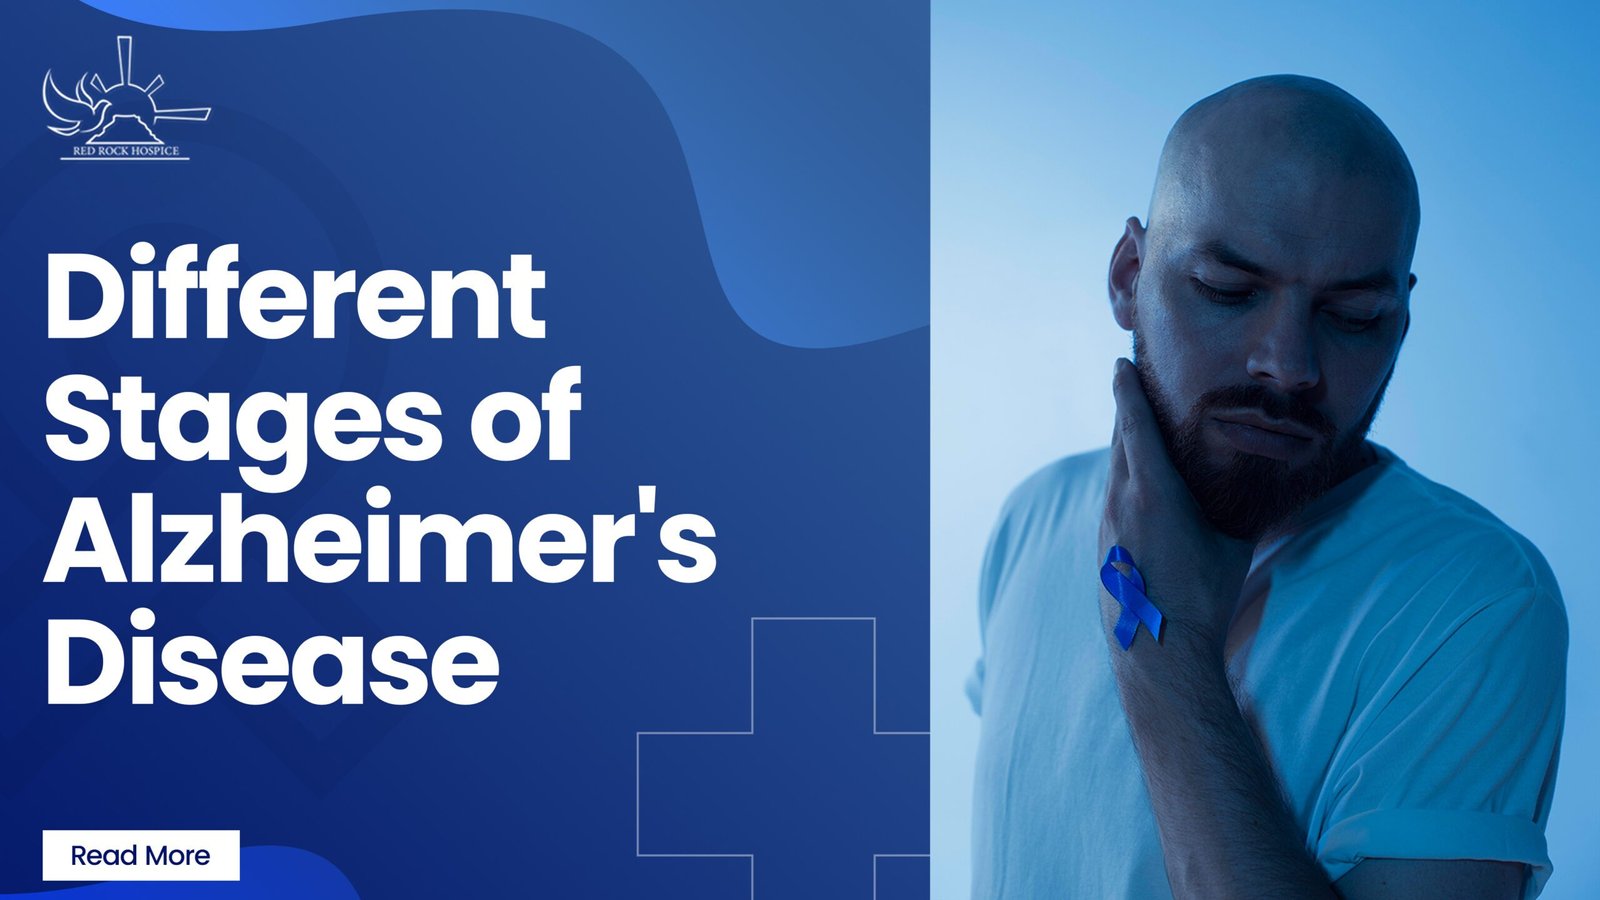 Breaking Down The Seven Stages of Alzheimer's Disease